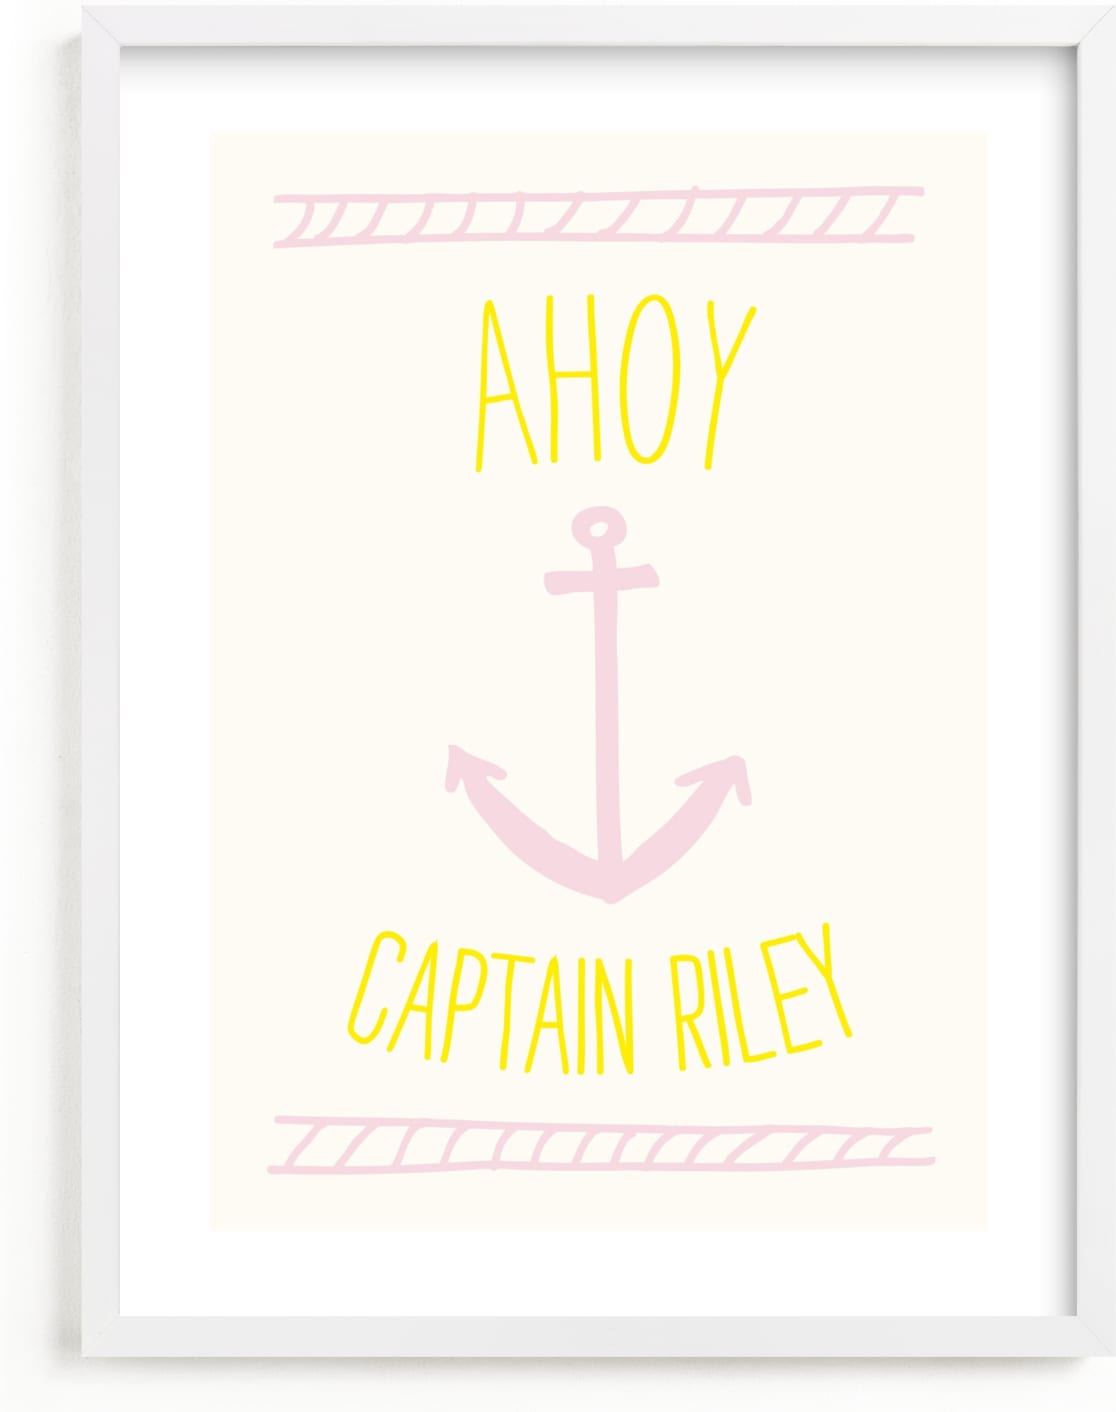 This is a pink personalized art for kid by Shari Margolin called Ahoy Matey.